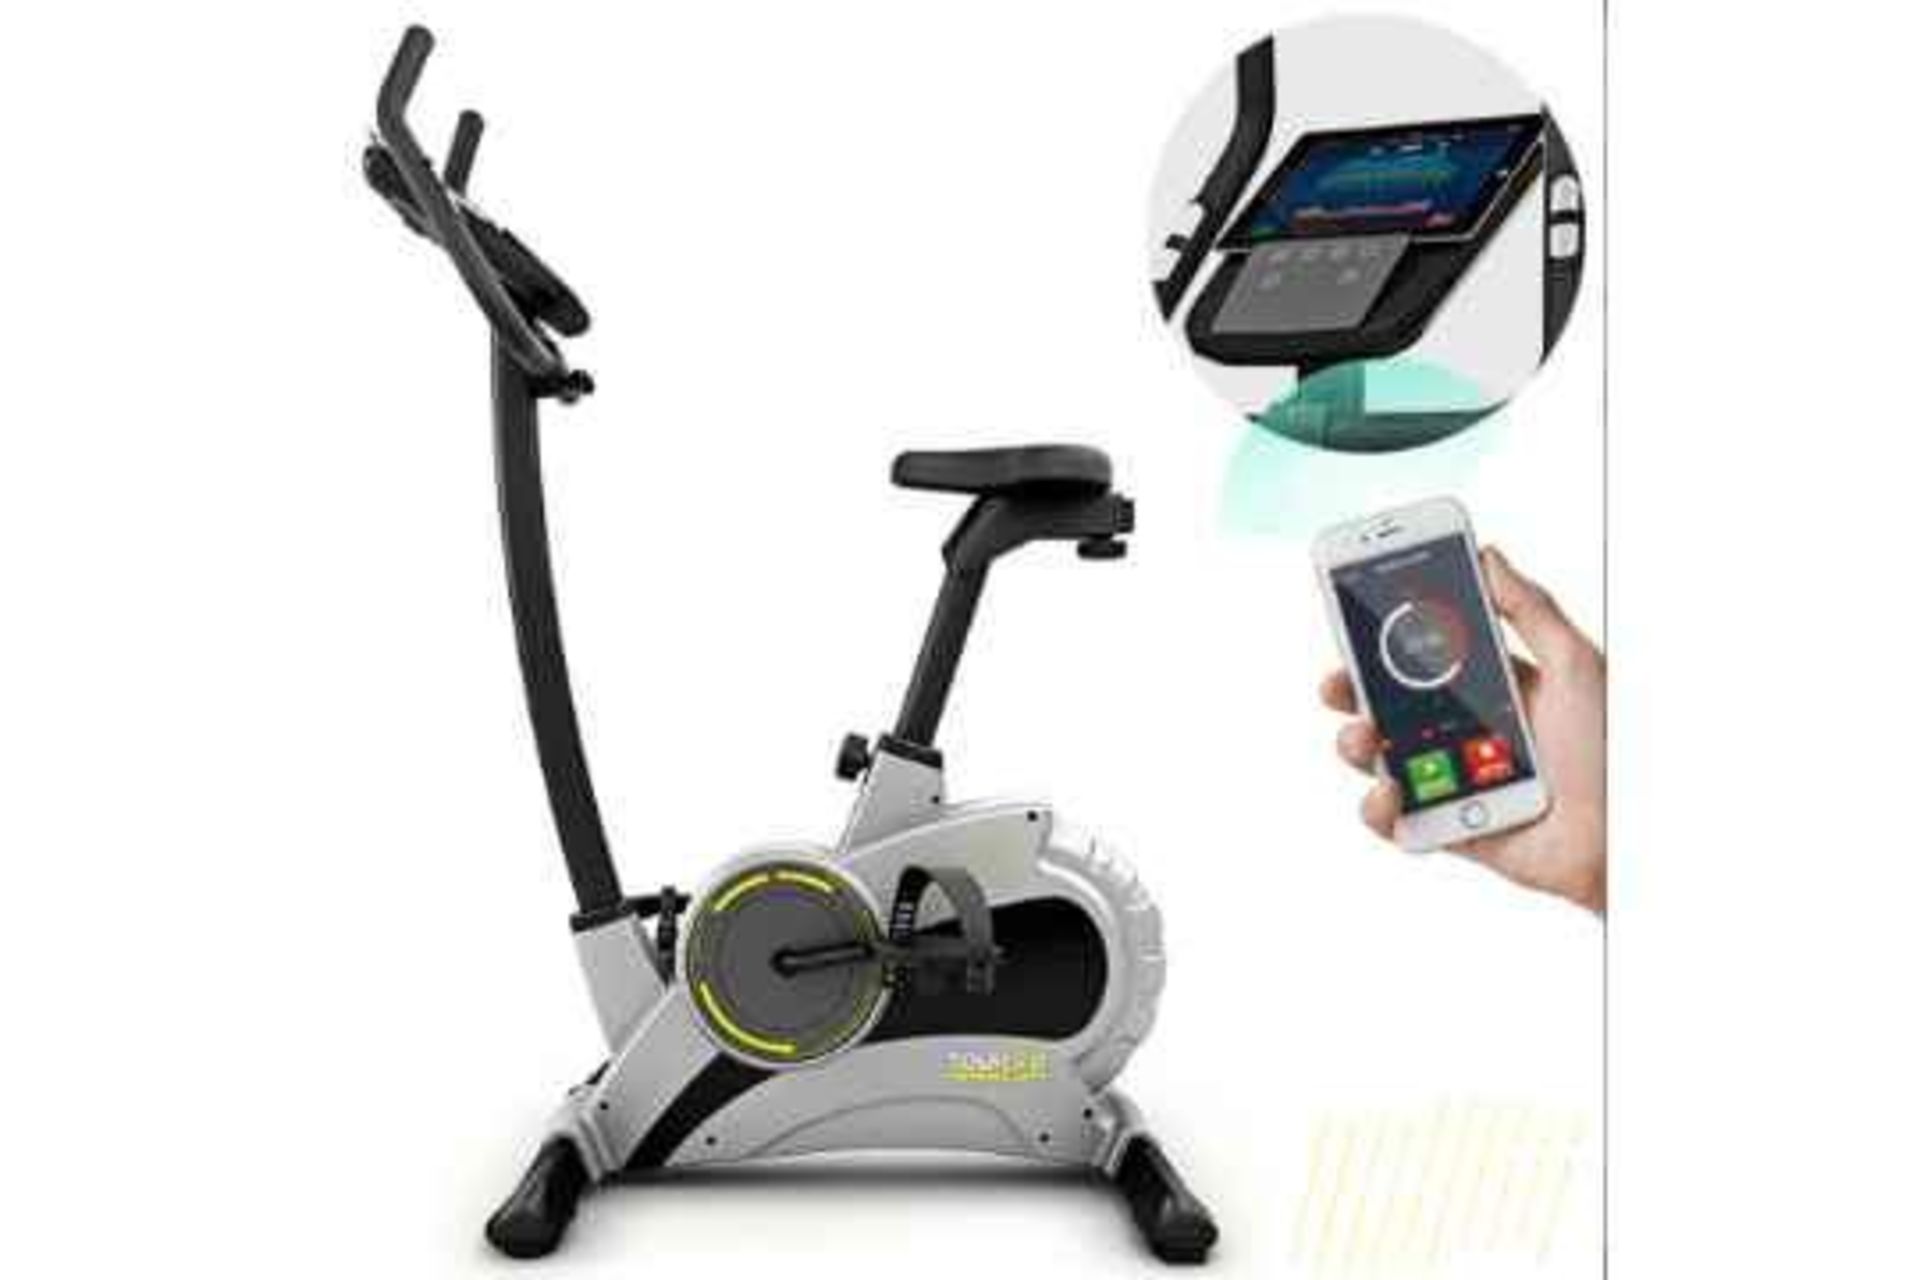 BLUEFIN FITNESS TOUR 5.0 RESISTANCE EXERCISE BIKE RRP £349.00